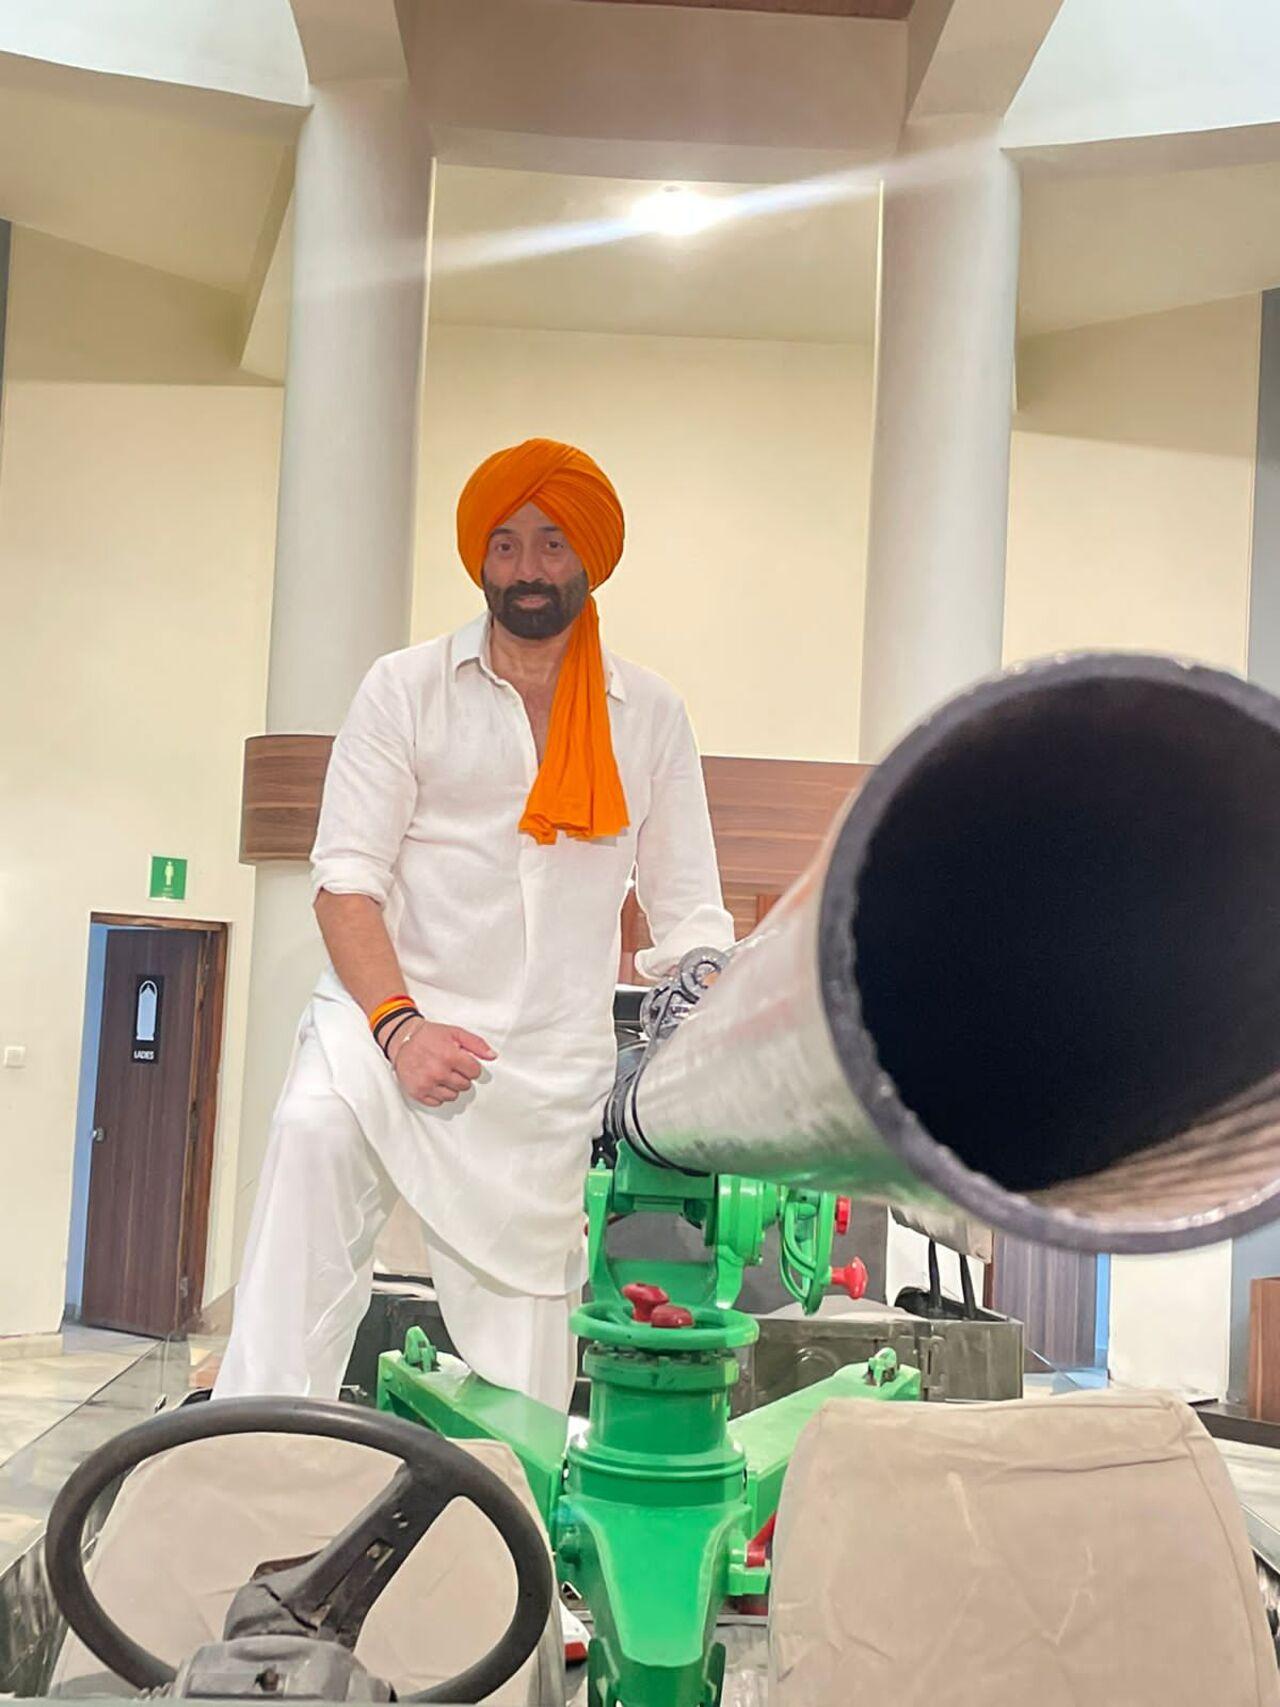 Dressed in a white kurta pajama and orange pagdi, the actor posed alongside a cannon